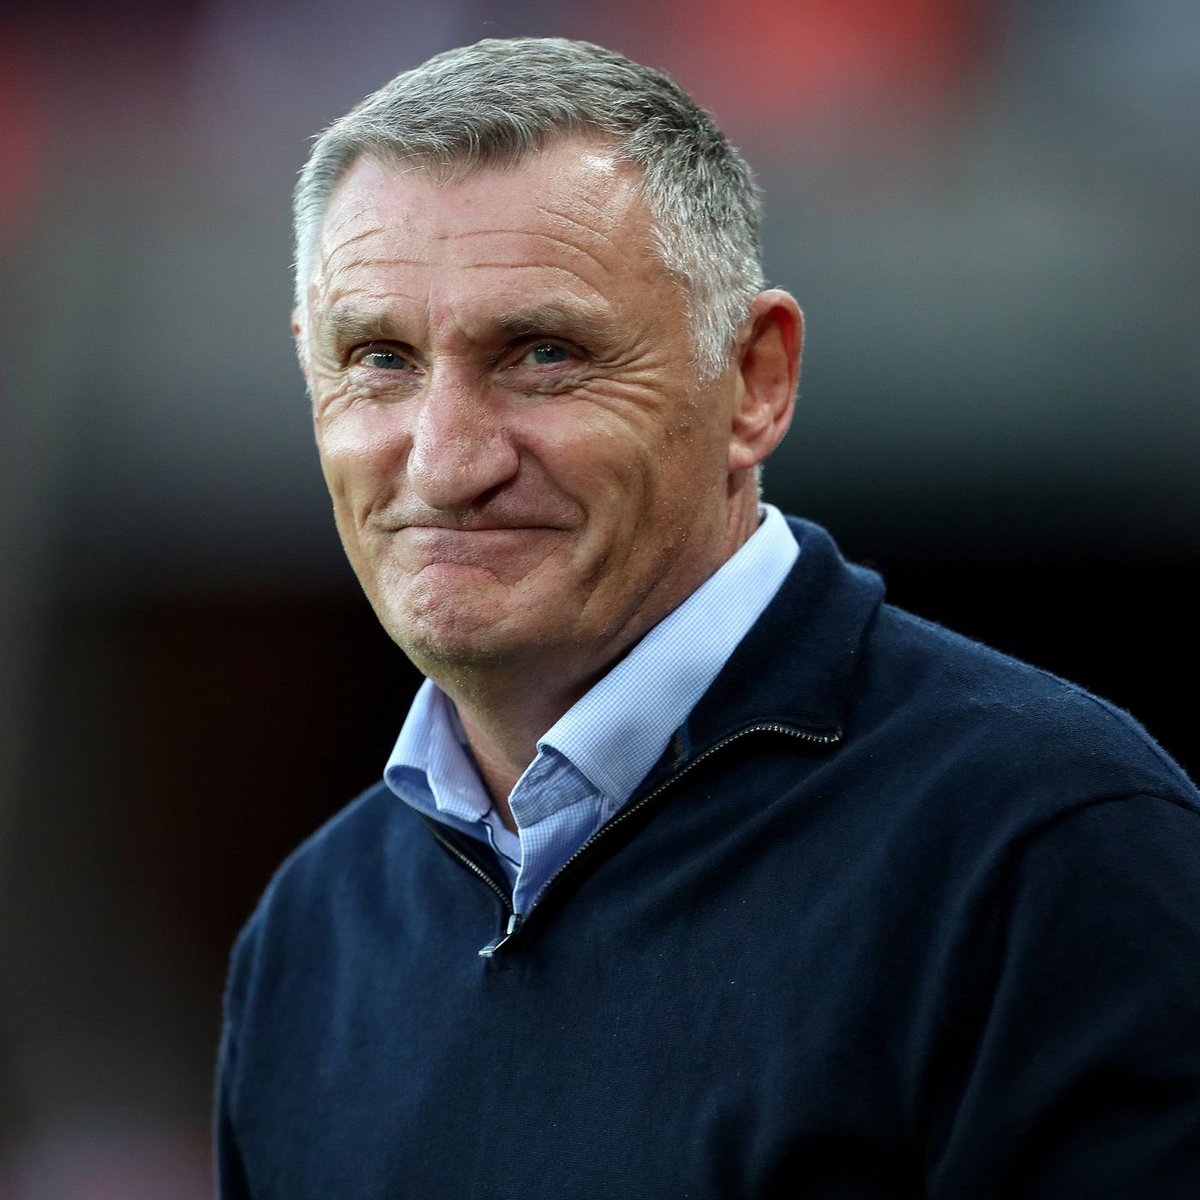 Tony Mowbray's Blackburn in L1 in the 2017/18 season:

46 matches
28 Wins
12 Draws
6 Loses
96 points
2nd place finish - only 2 points of 1st place Wigan
82 Goals Scored
40 Goals Conceded
51 Points at Ewood Park - best in L1
45 Points away from home - 2nd best in L1

#BCFC #KRO